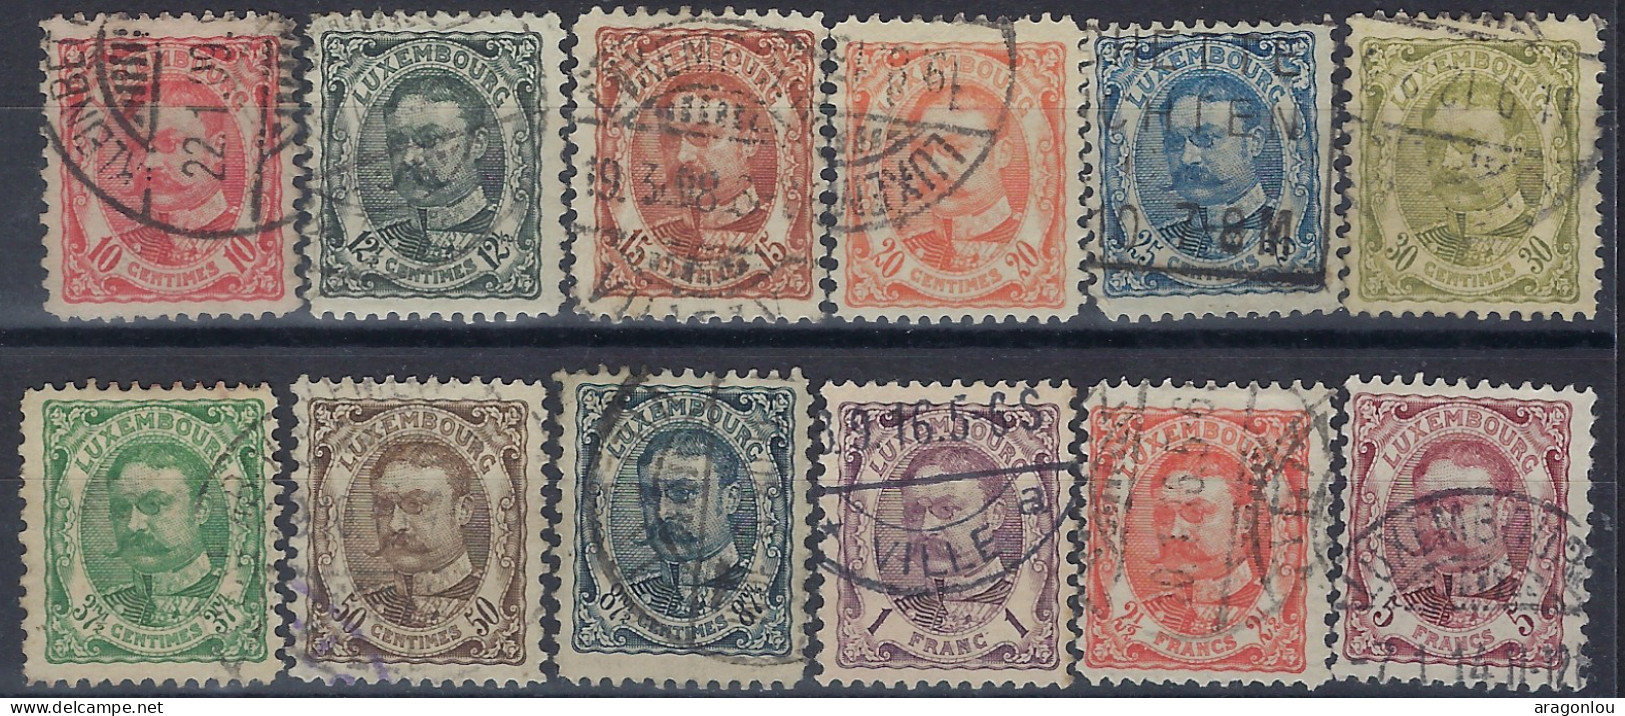 Luxembourg - Luxemburg - Timbre  1906   Guillaume IV    Série   ° - 1906 Guglielmo IV